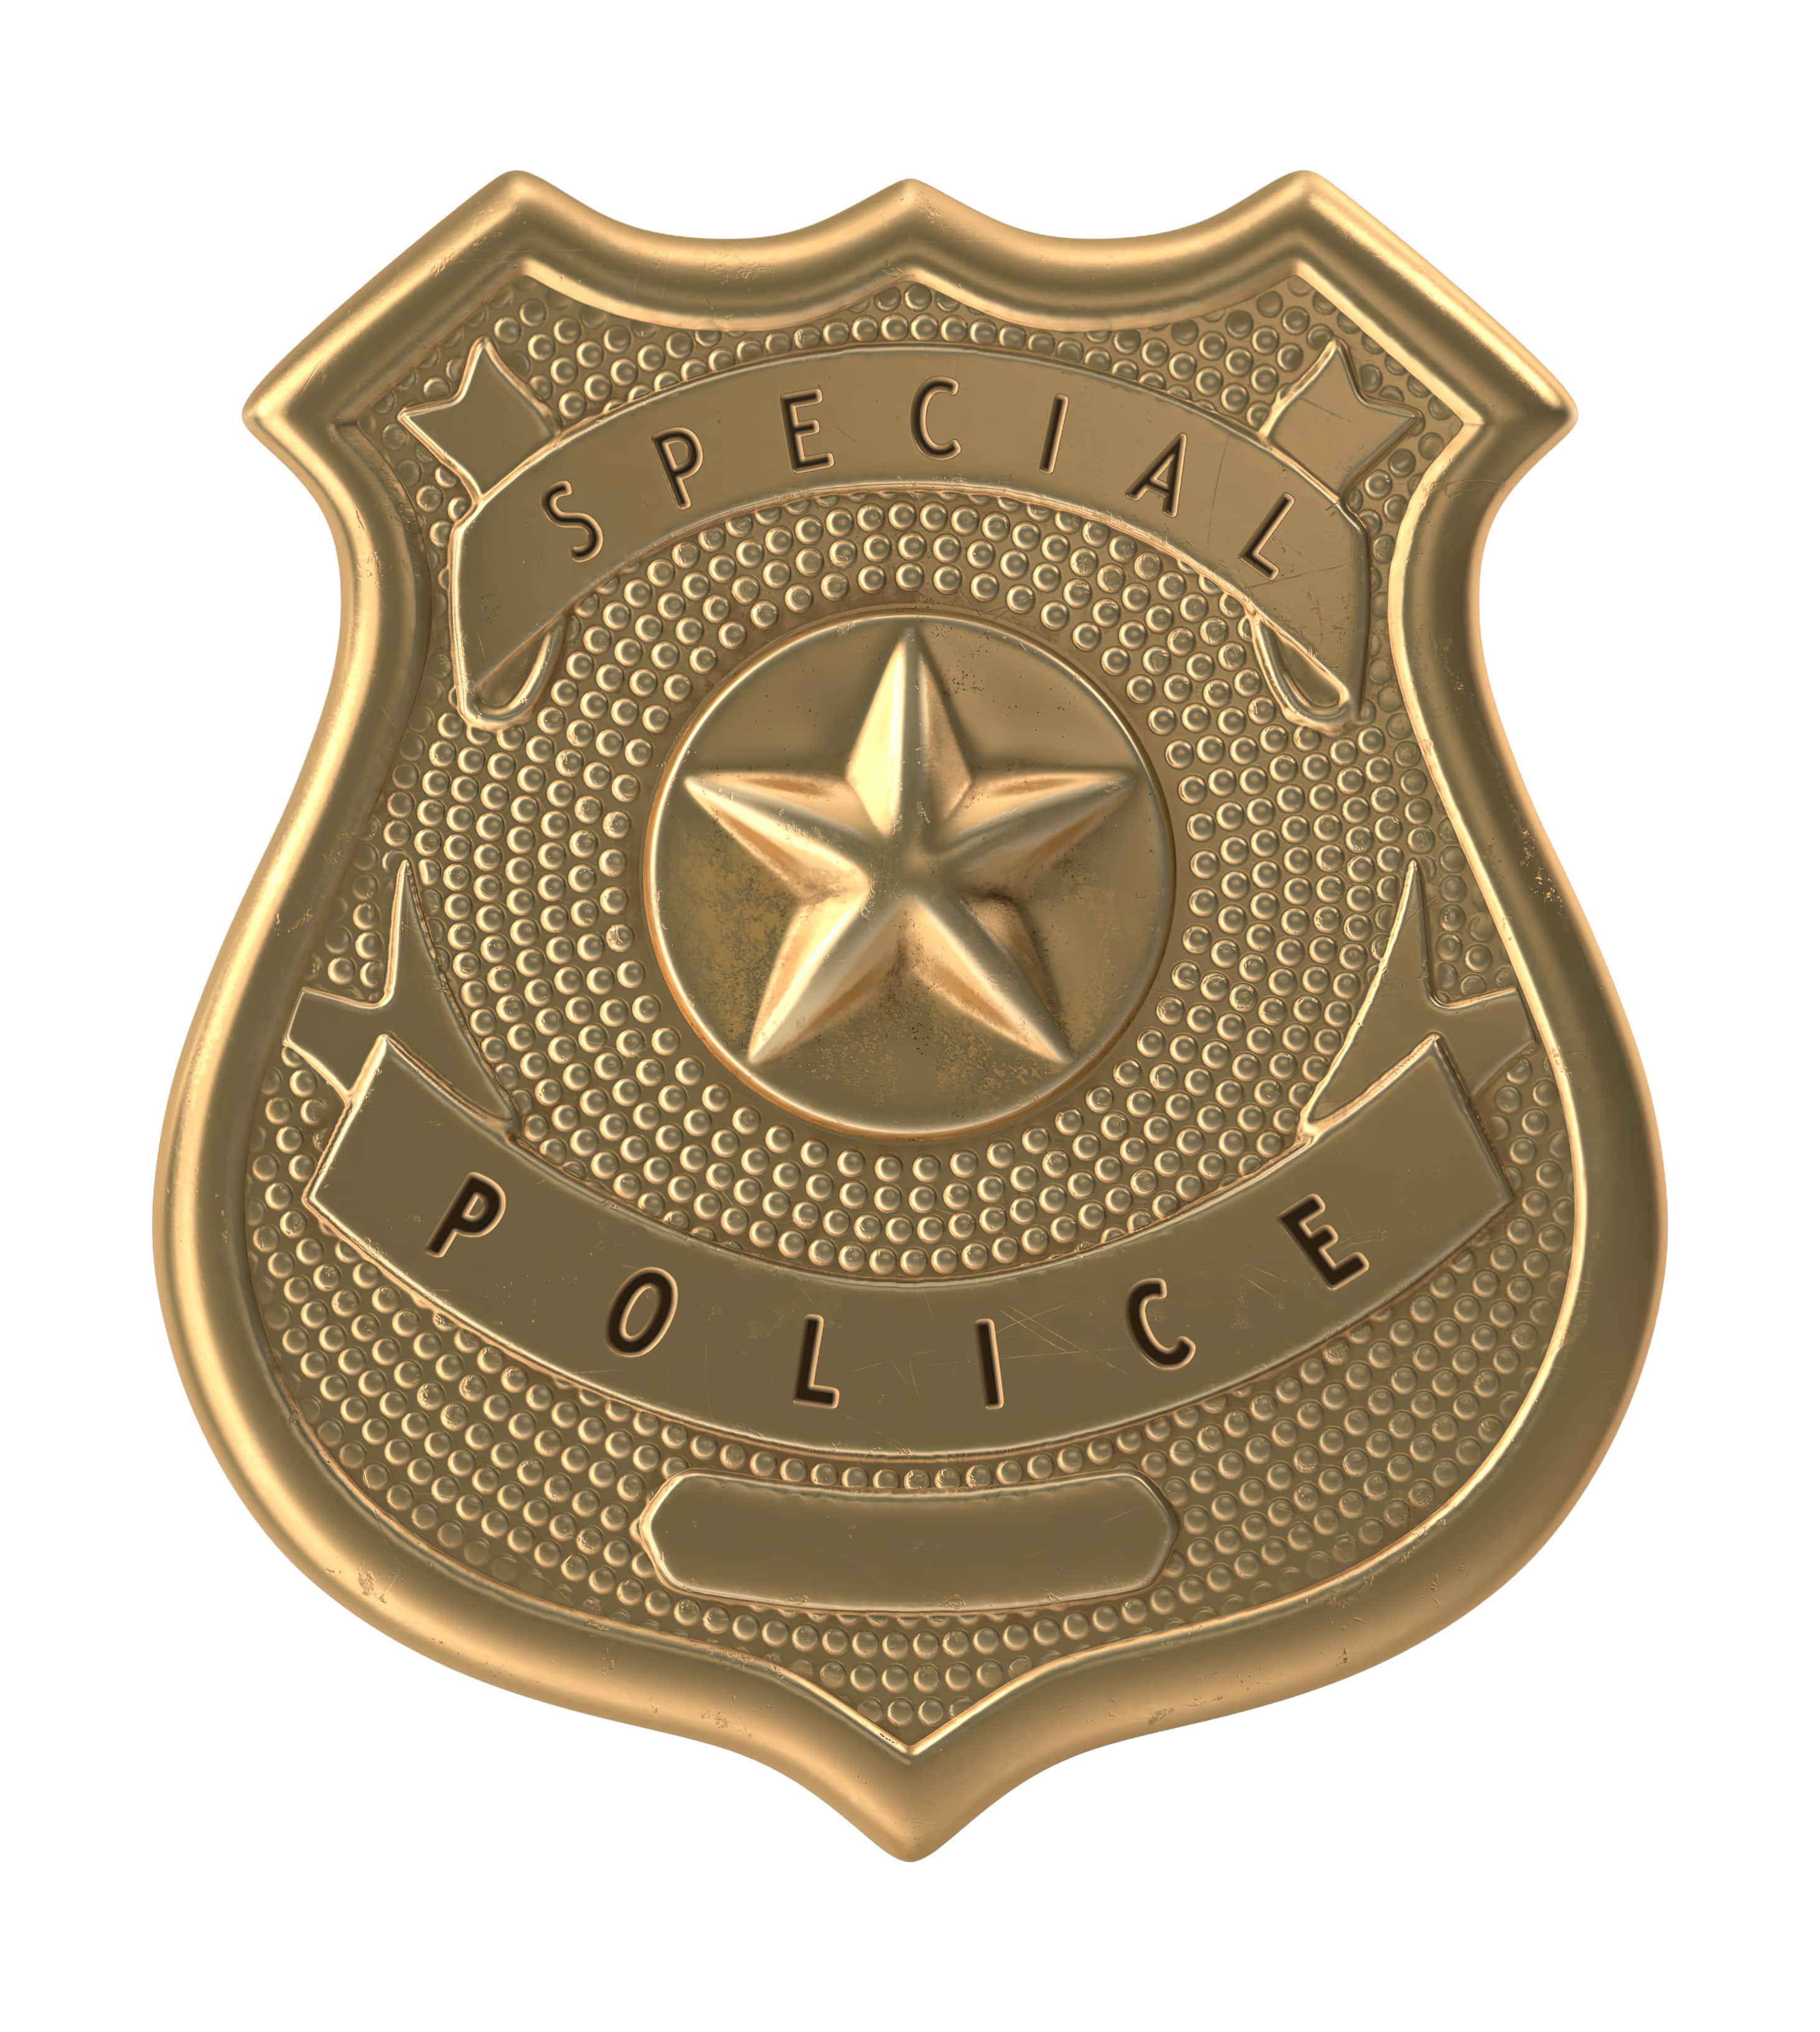 police challenge coin with white background